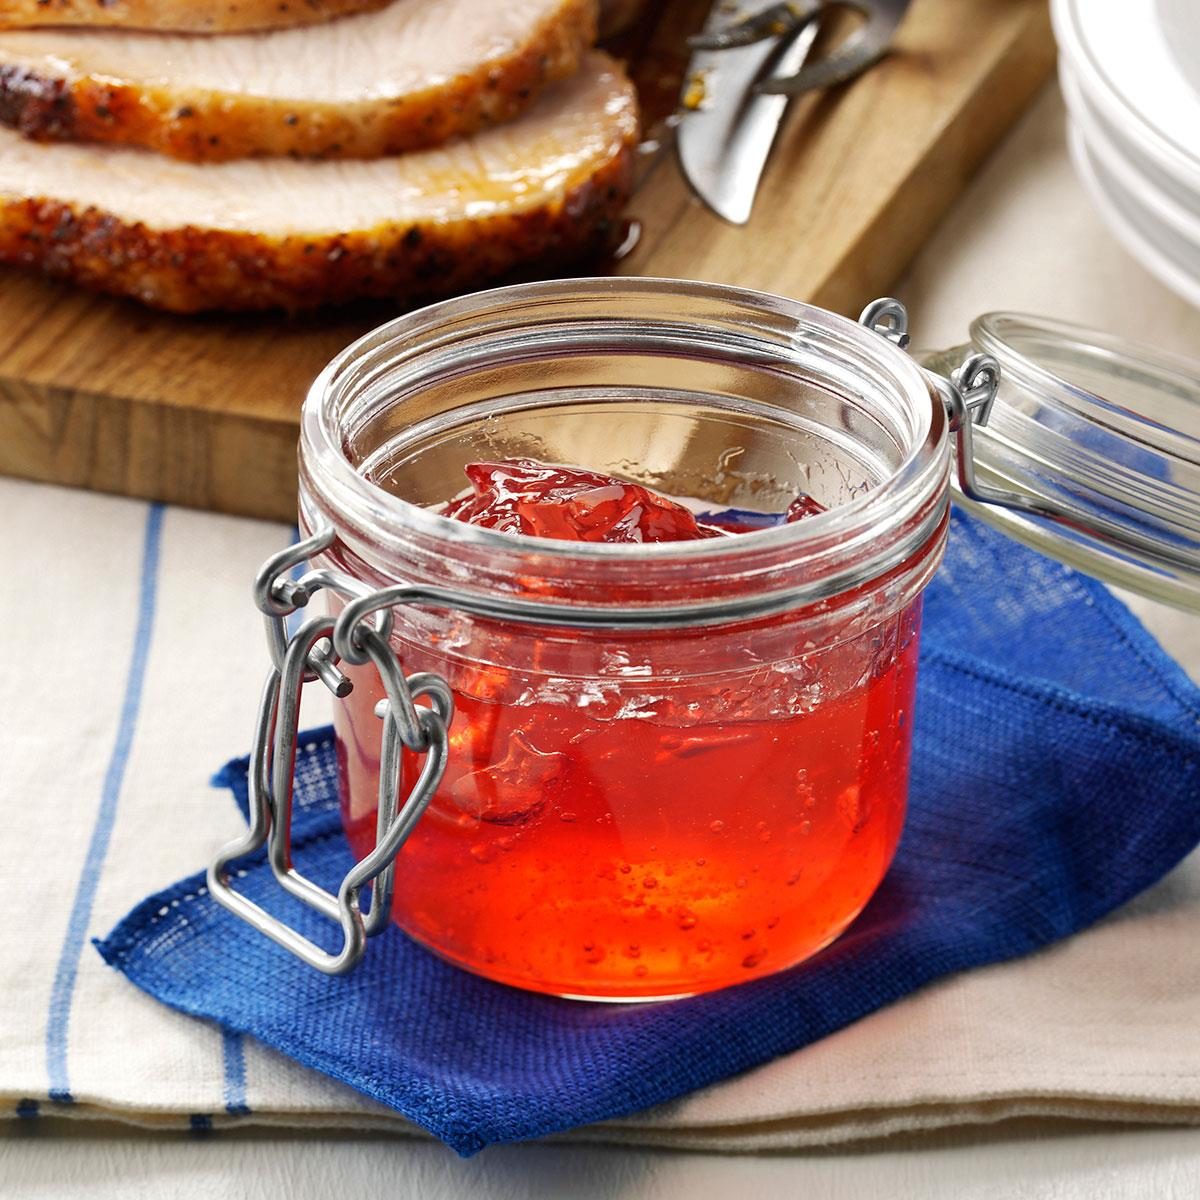 https://www.tasteofhome.com/wp-content/uploads/2018/01/Rhubarb-Jelly_exps2013_CP143300D02_21_3bC_RMS.jpg?fit=700%2C1024